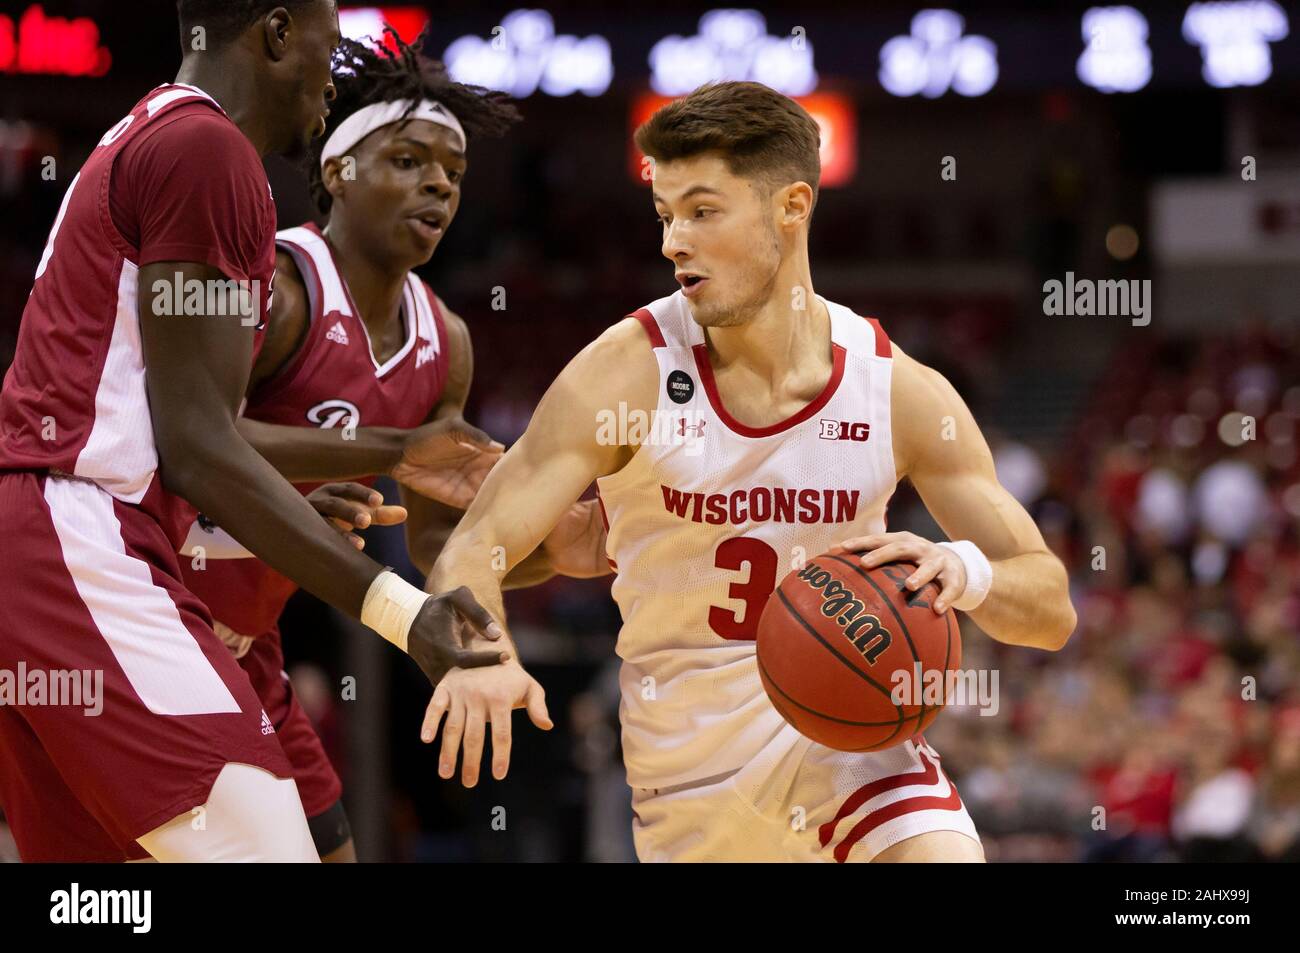 Madison, WI, USA. 31st Dec, 2019. Wisconsin Badgers guard Walt McGrory #3 in action during the NCAA Basketball game between the Rider Broncs and the Wisconsin Badgers at the Kohl Center in Madison, WI. John Fisher/CSM/Alamy Live News Stock Photo